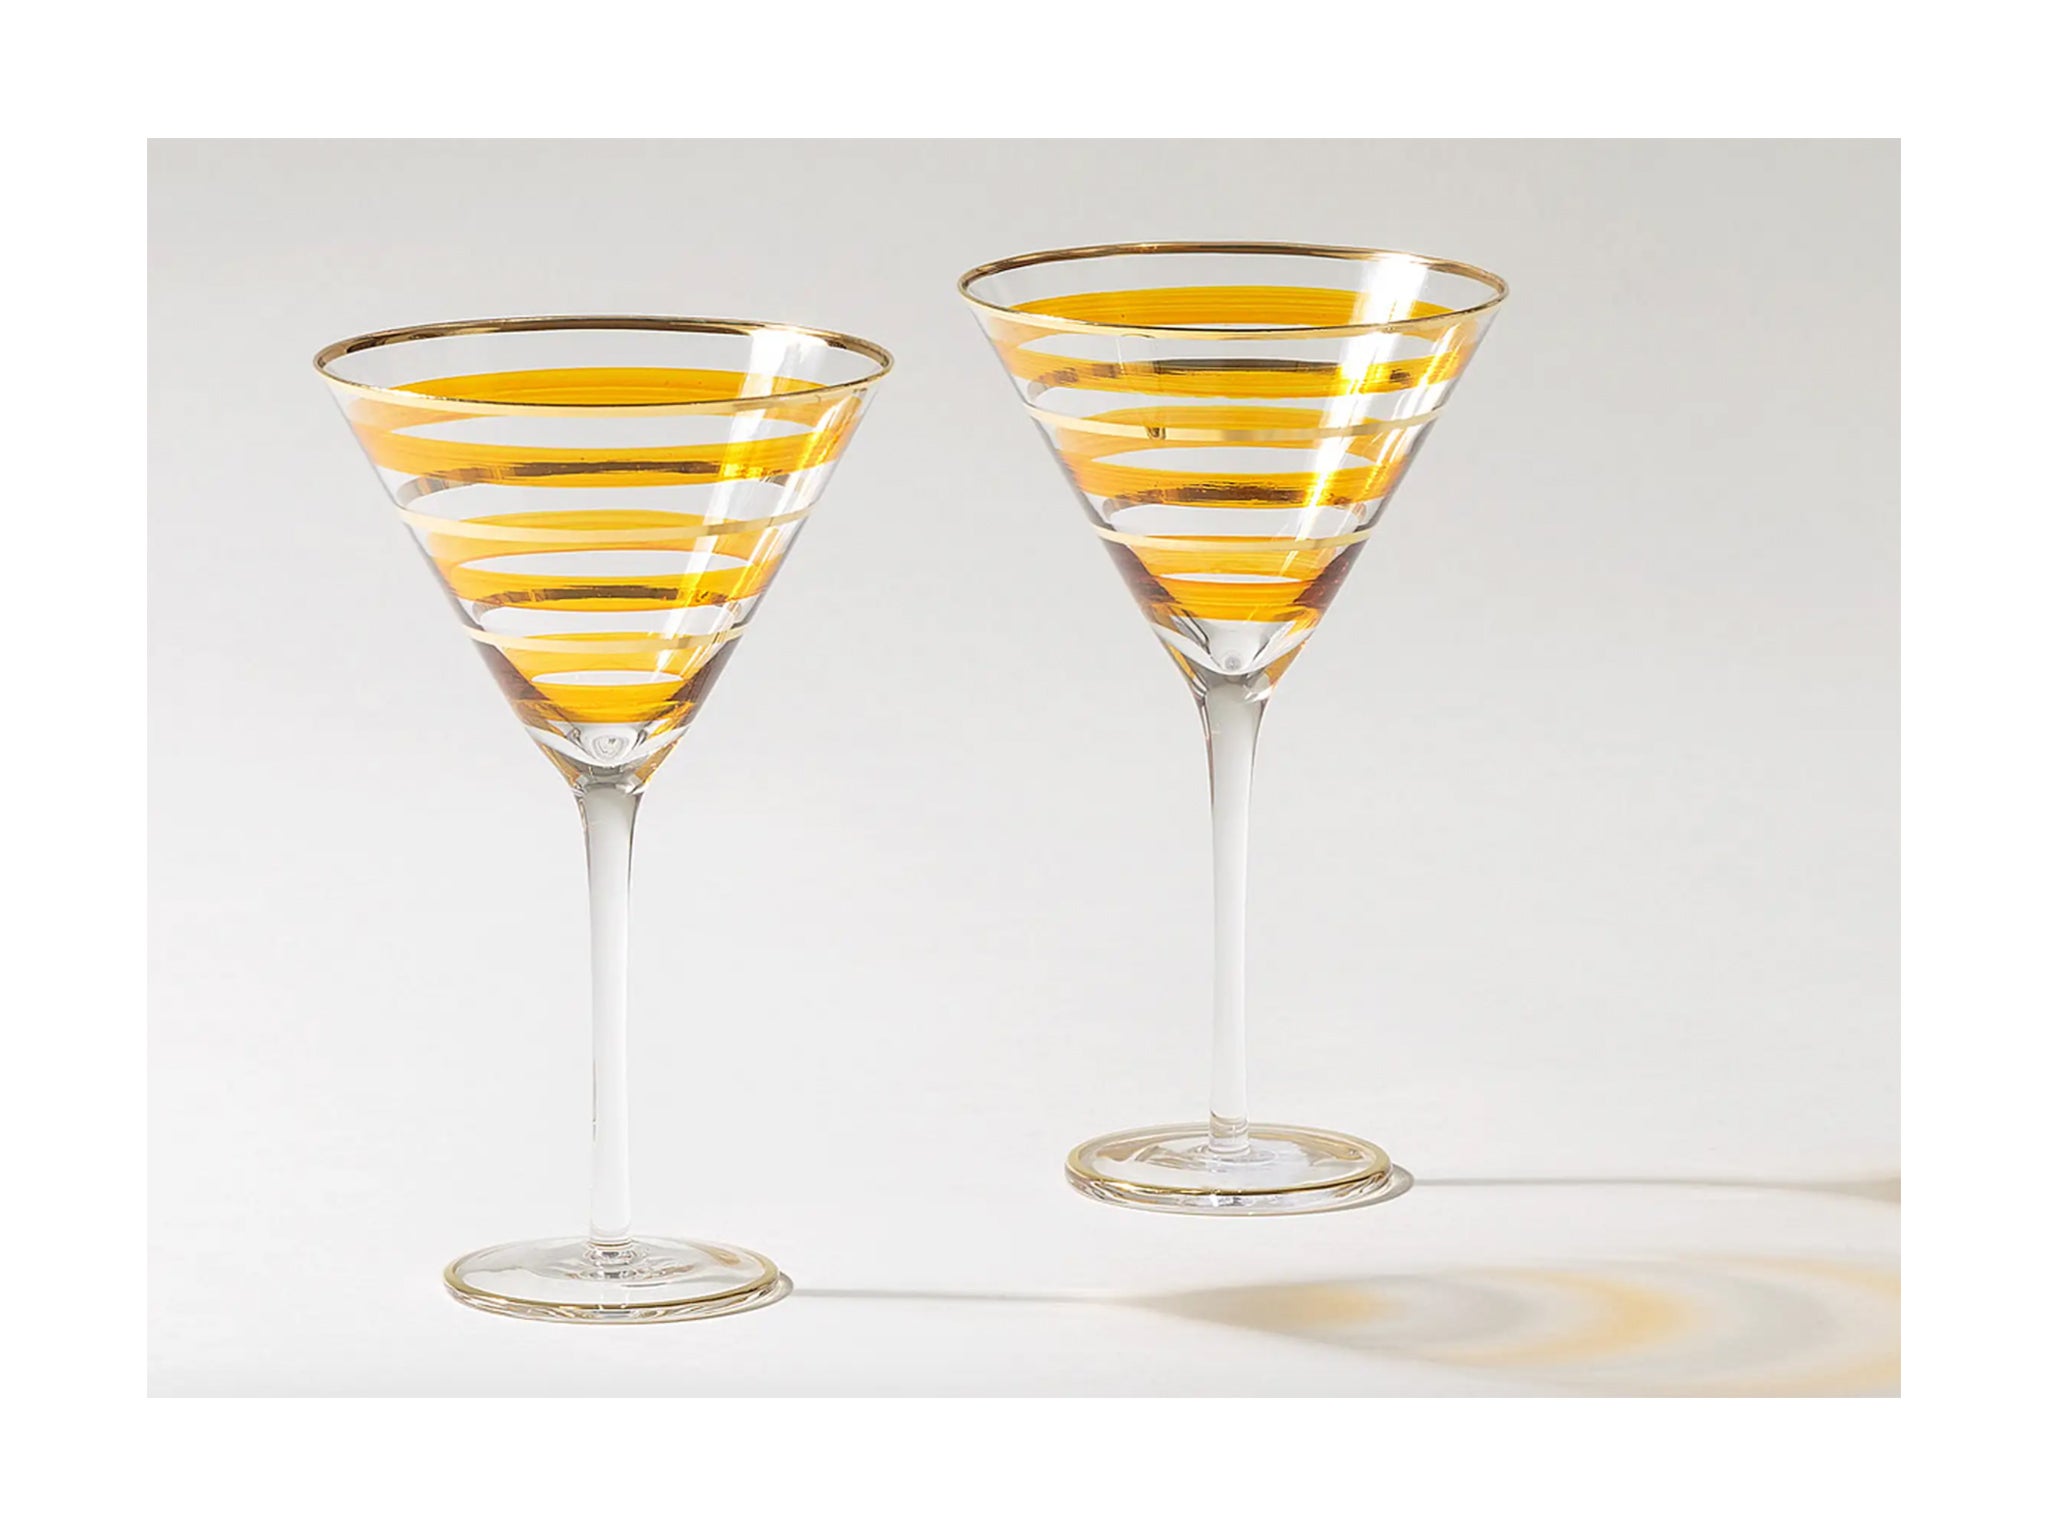 Sit back and relax with your new-found martini making skills with this stylish set of glassware